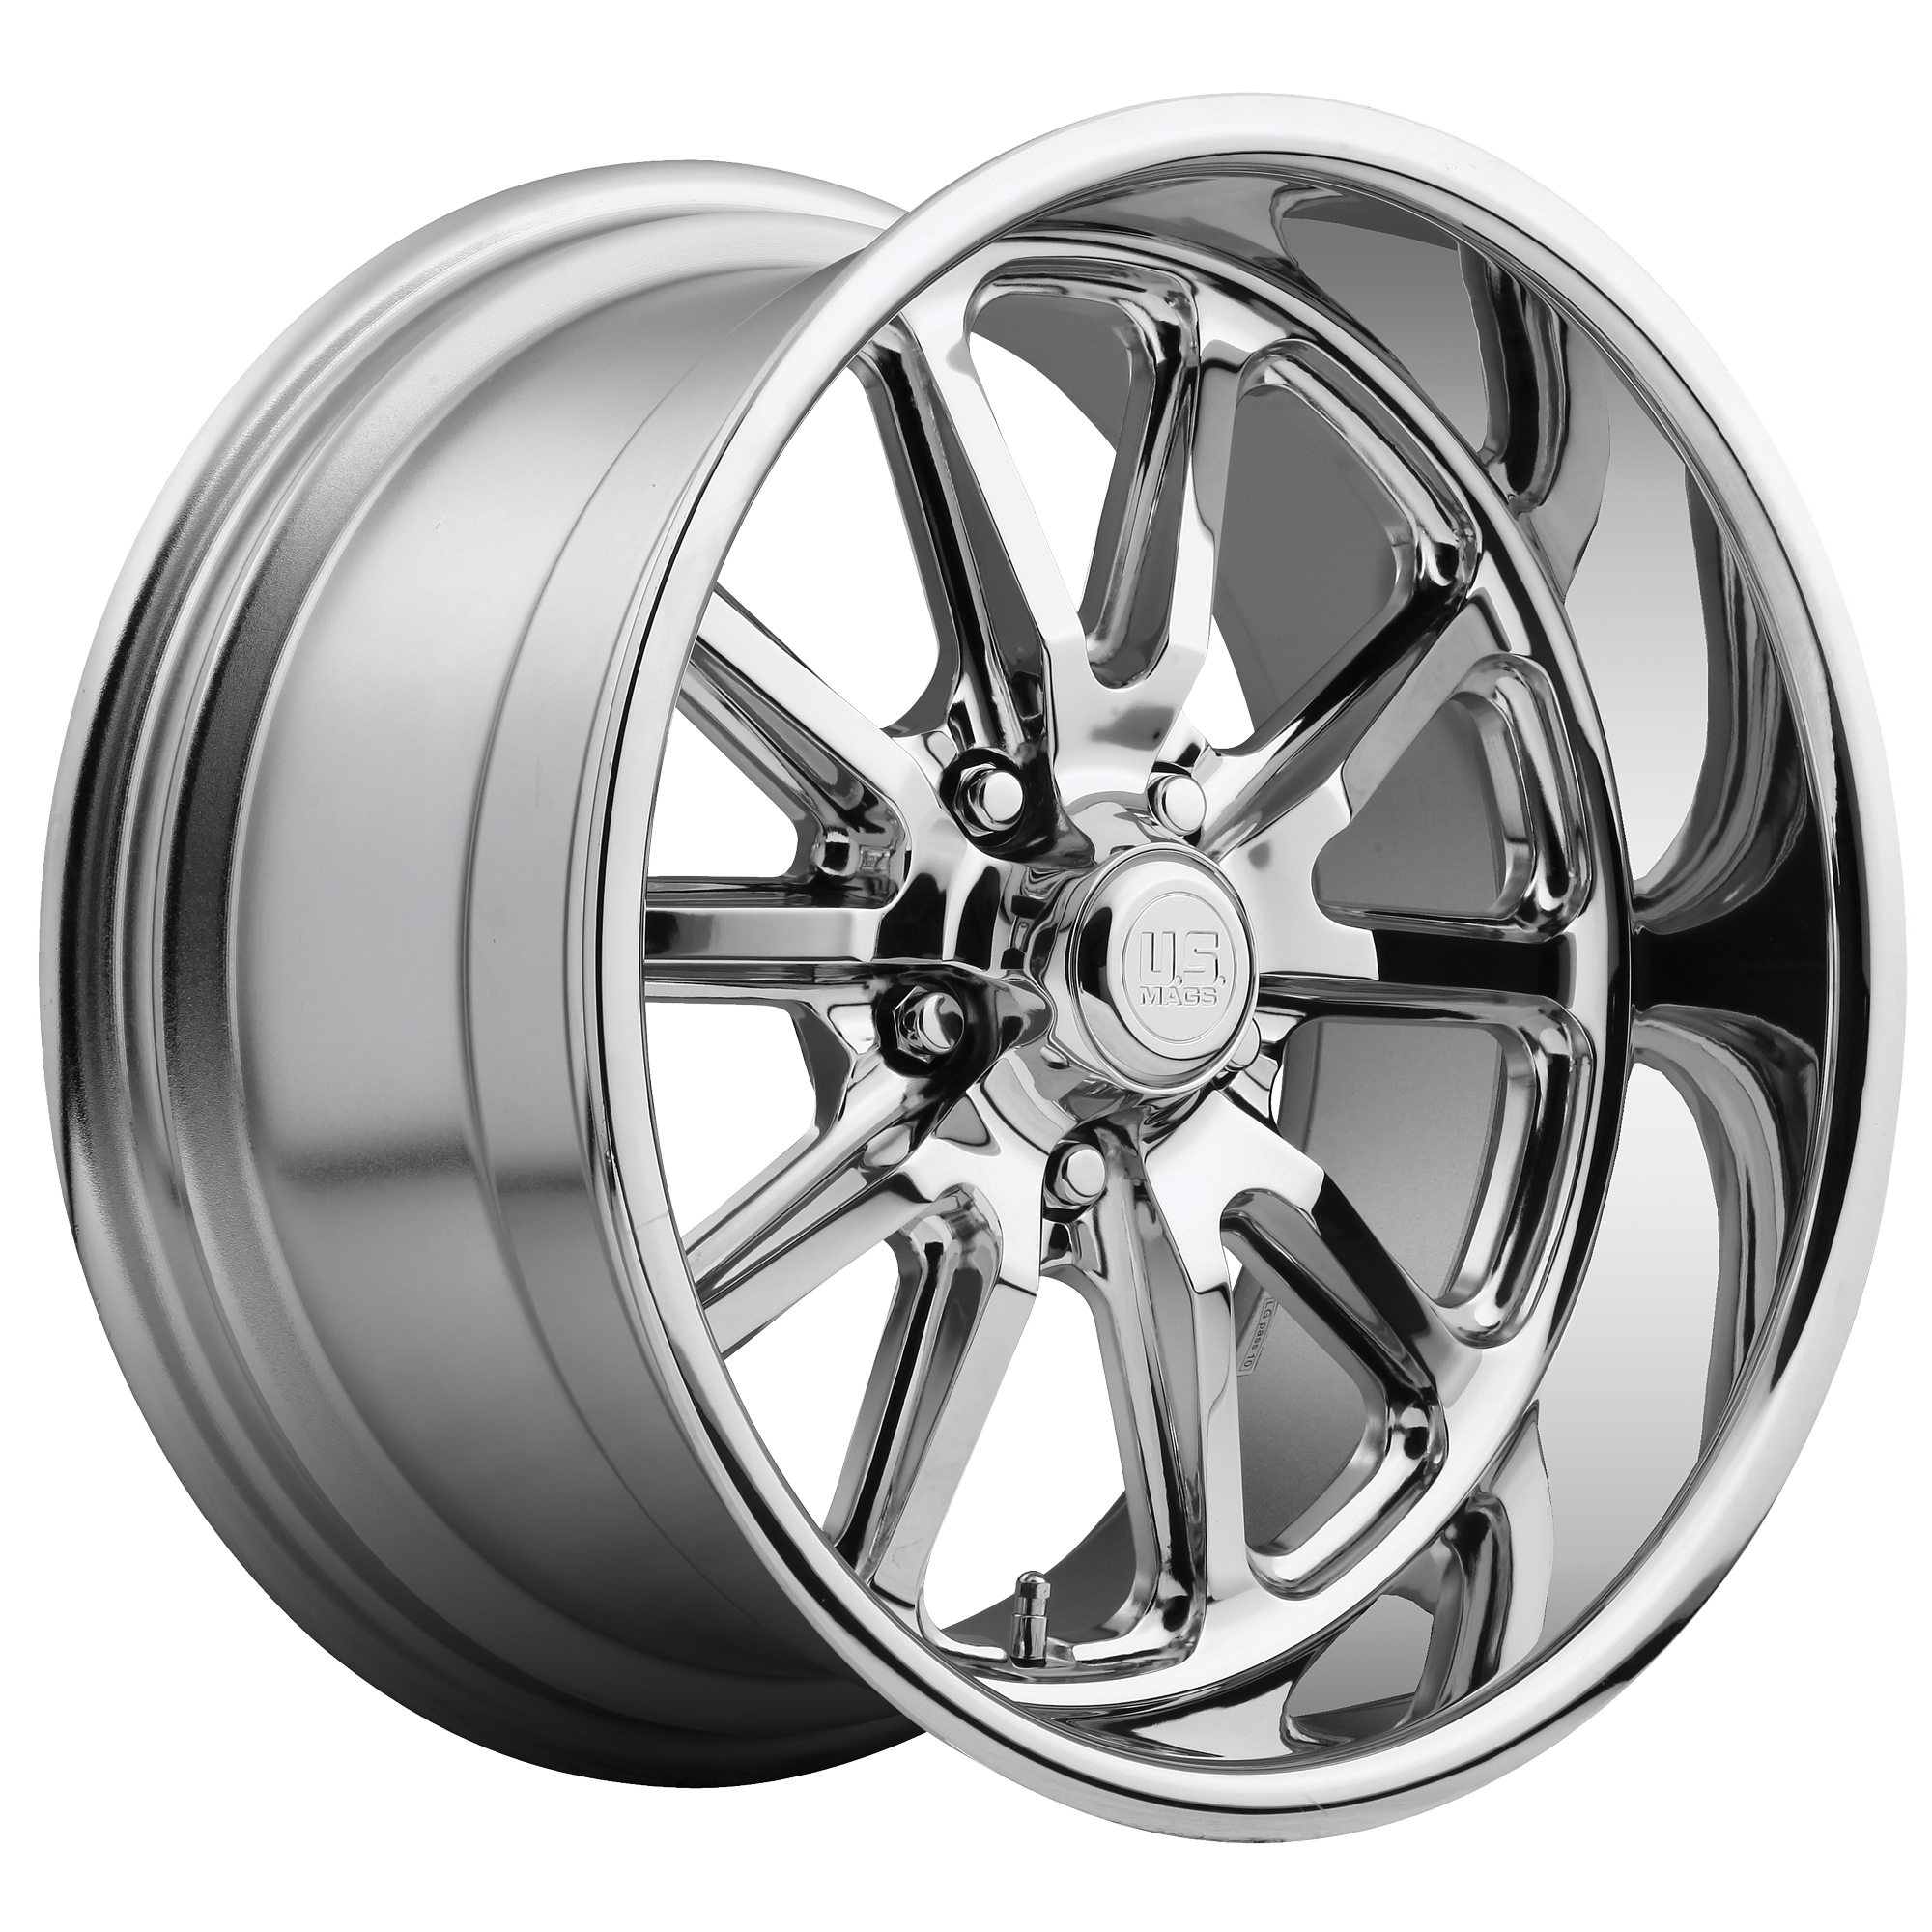 RAMBLER 15x7 5x114.30 CHROME PLATED (1 mm) - Tires and Engine Performance